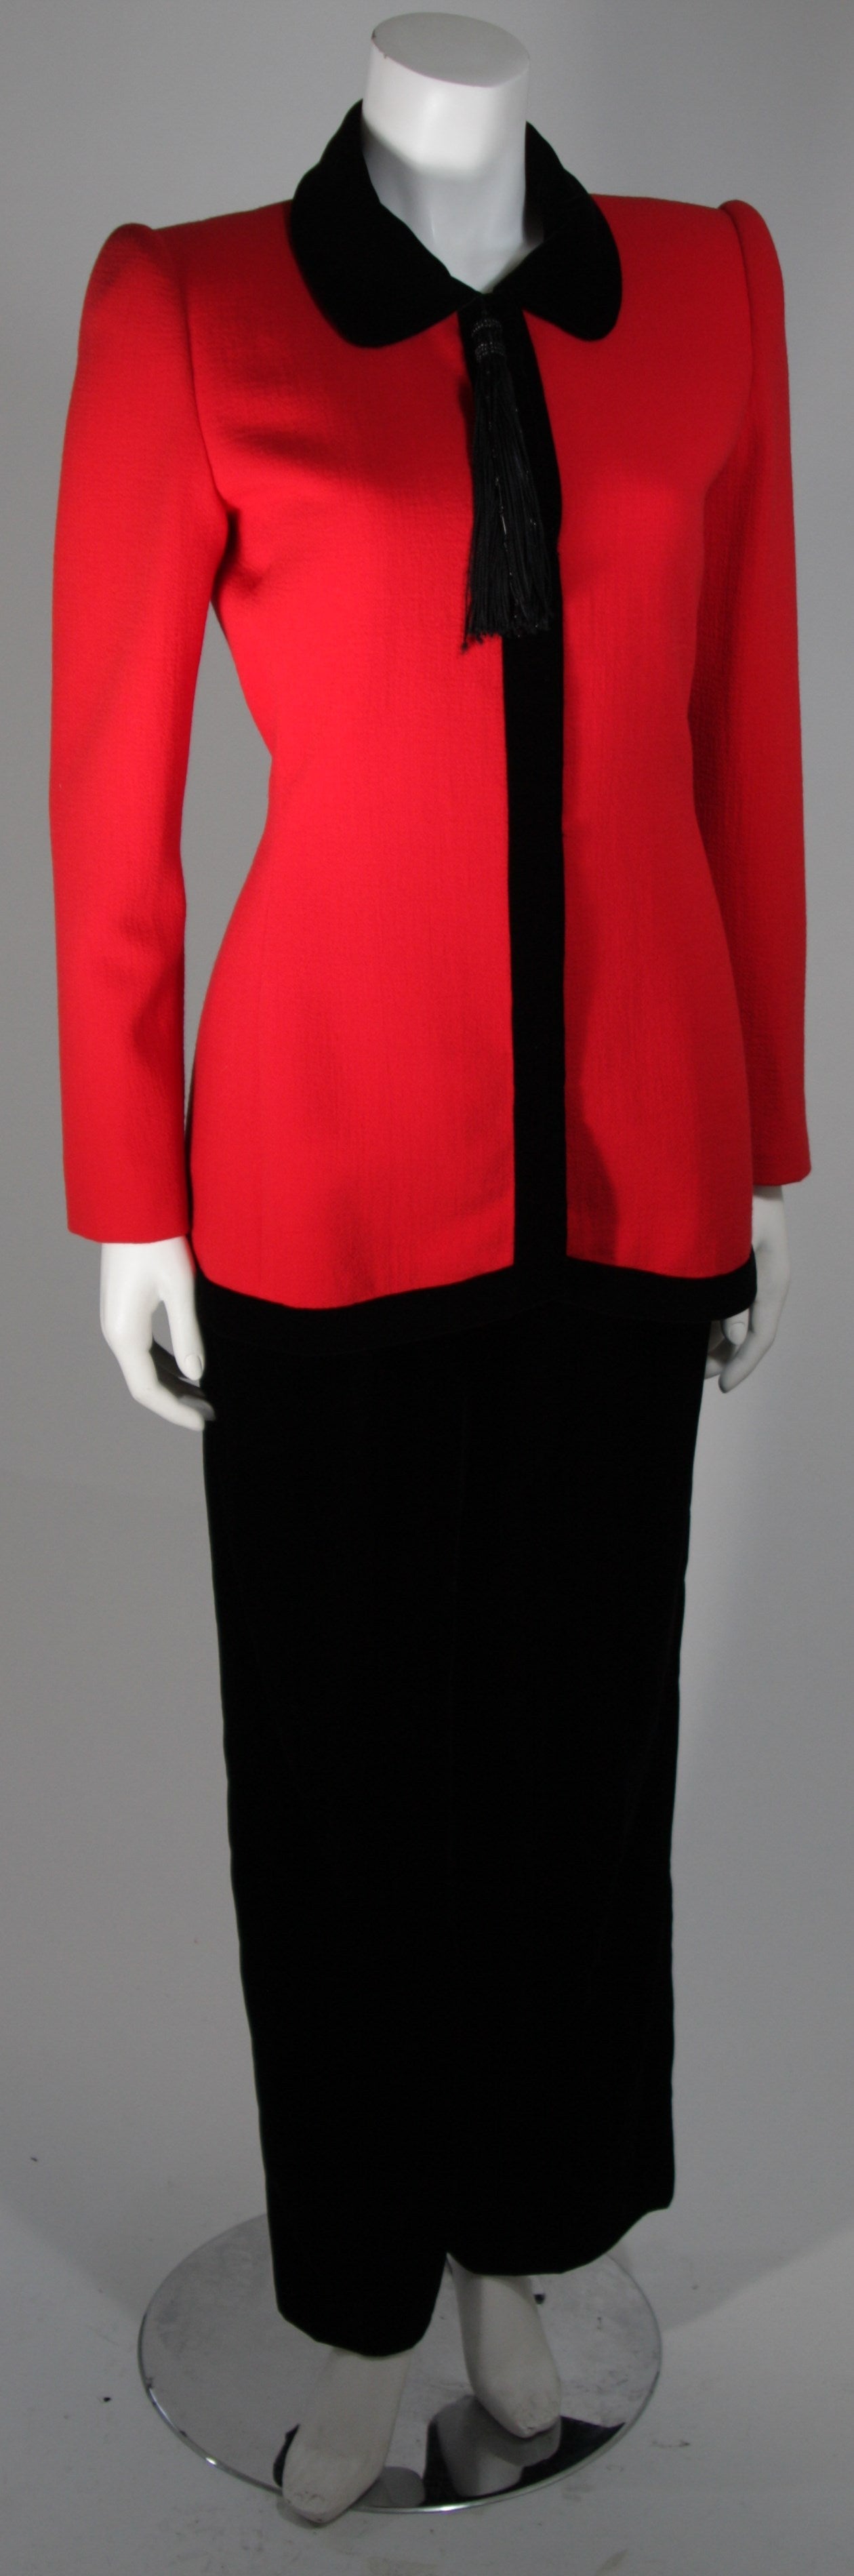 This Carolina Herrera Couture design is available for viewing at our Beverly Hills Boutique. We offer a large selection of evening gowns and luxury garments.

This suit is composed of a red wool which features a velvet trim jacket and black velvet